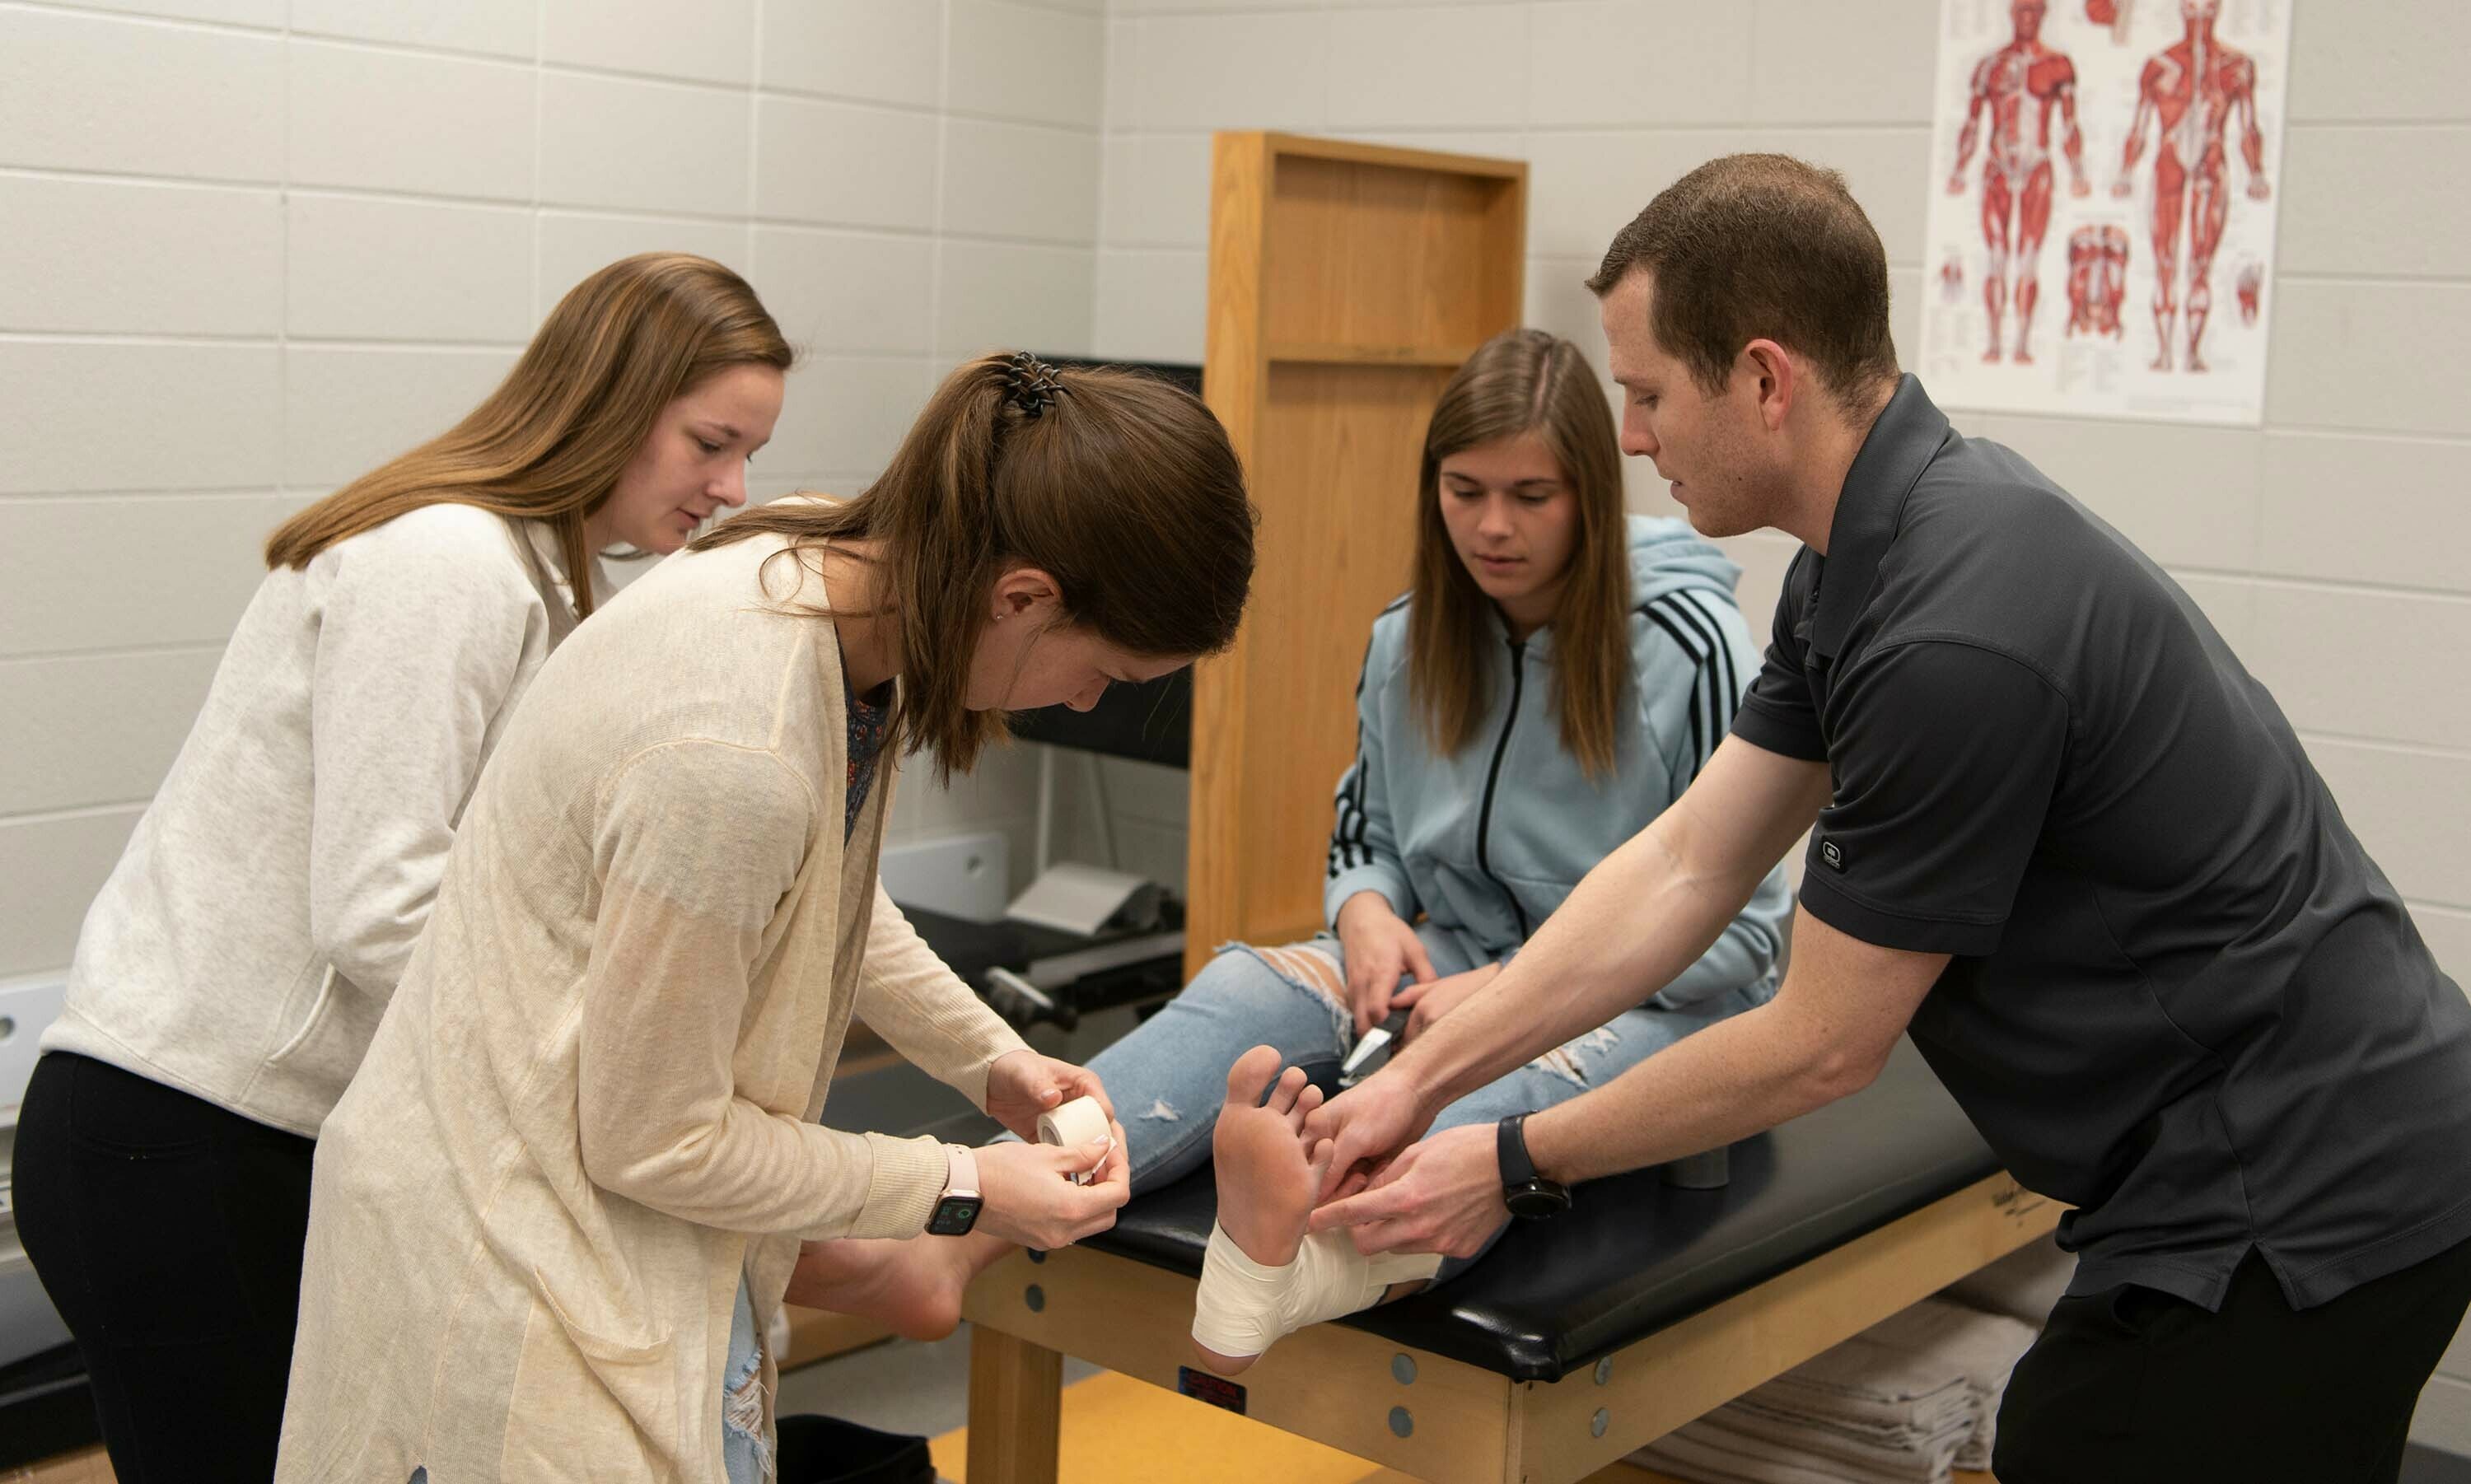 A professor helps two students as they tape another student's ankle